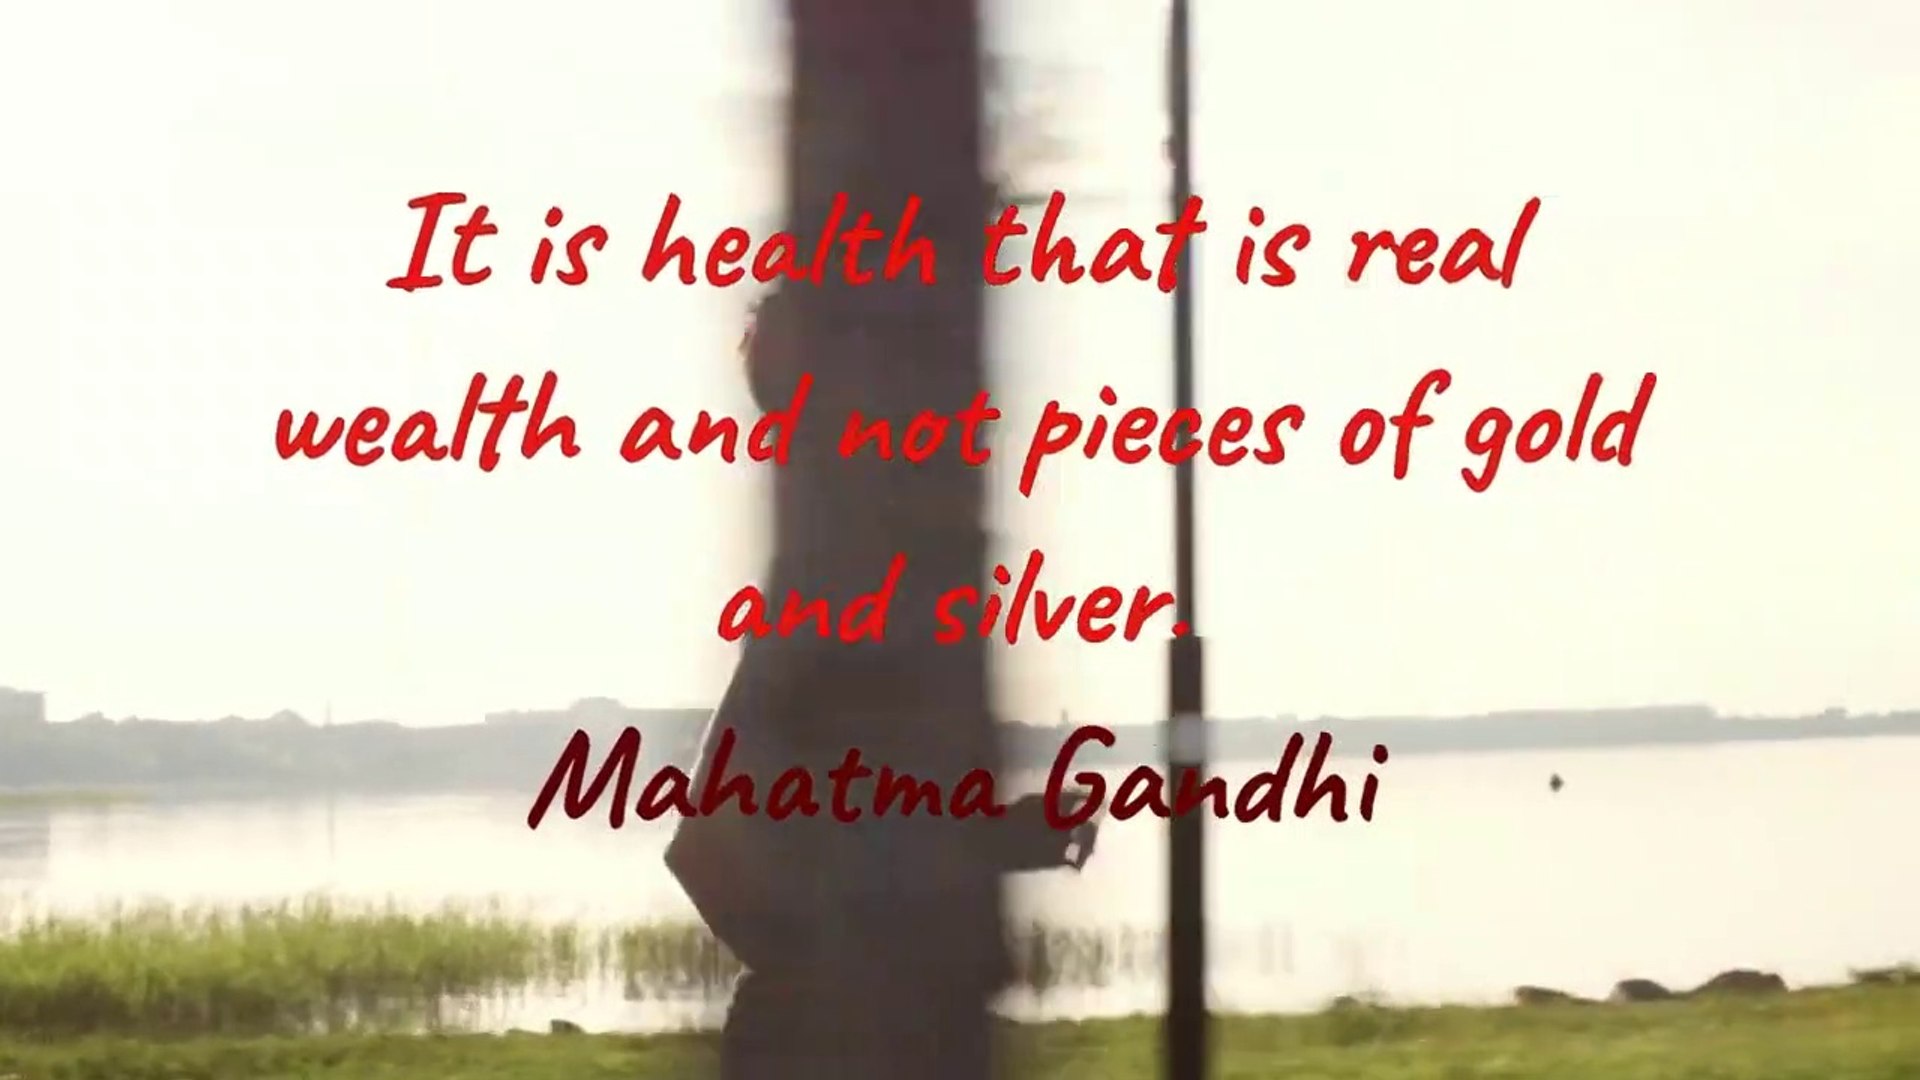 health is the real wealth